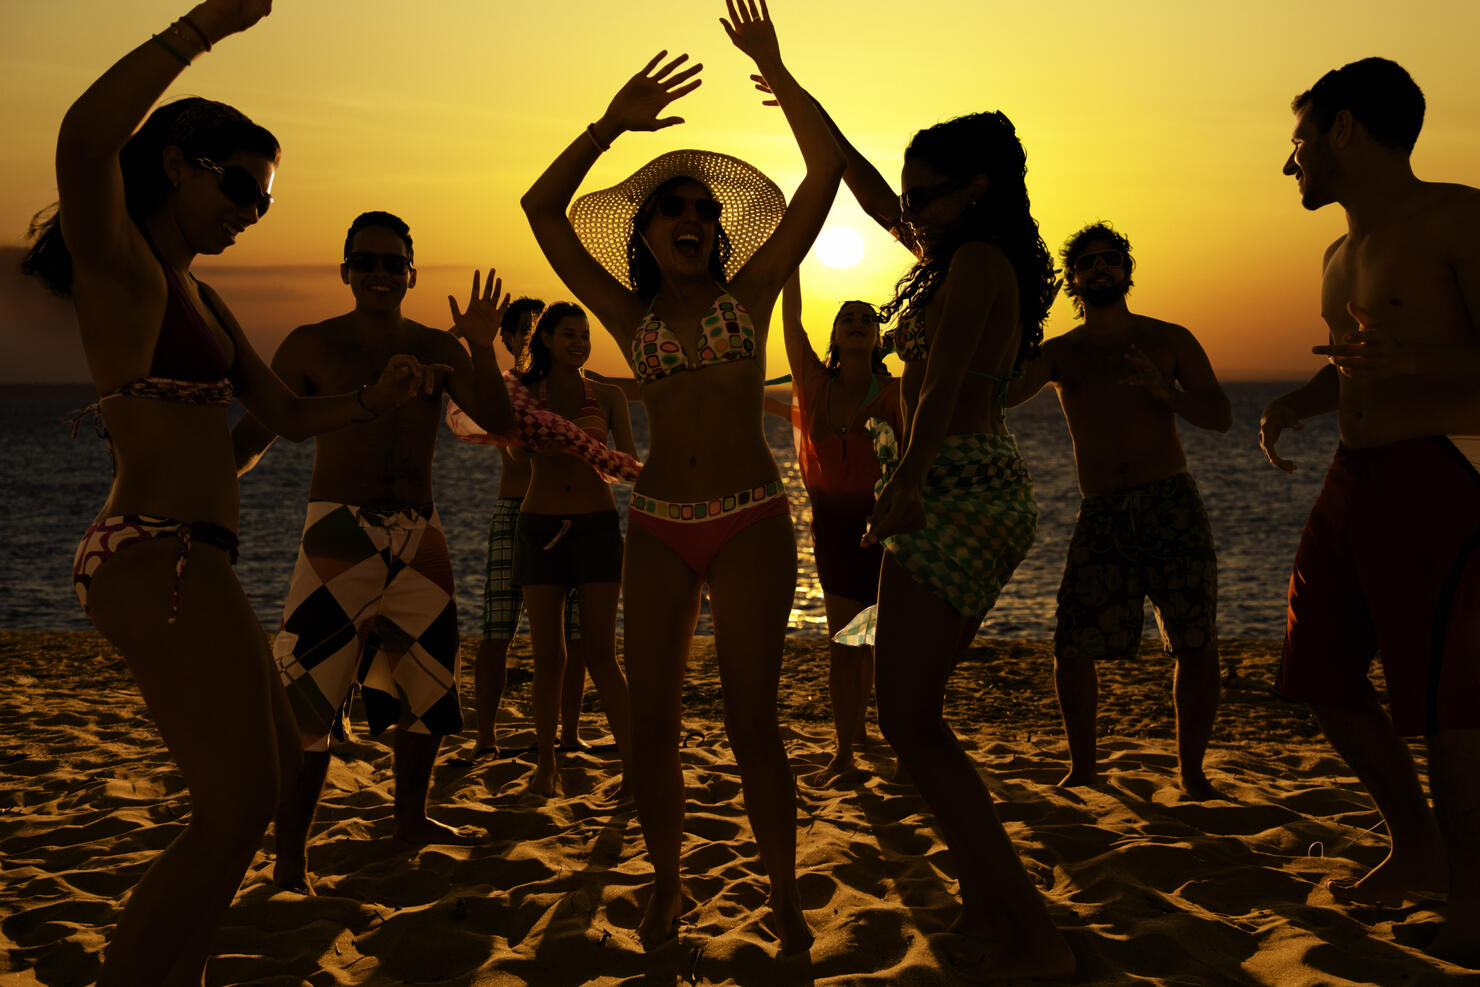 Spring break group of young people dancing on a beach